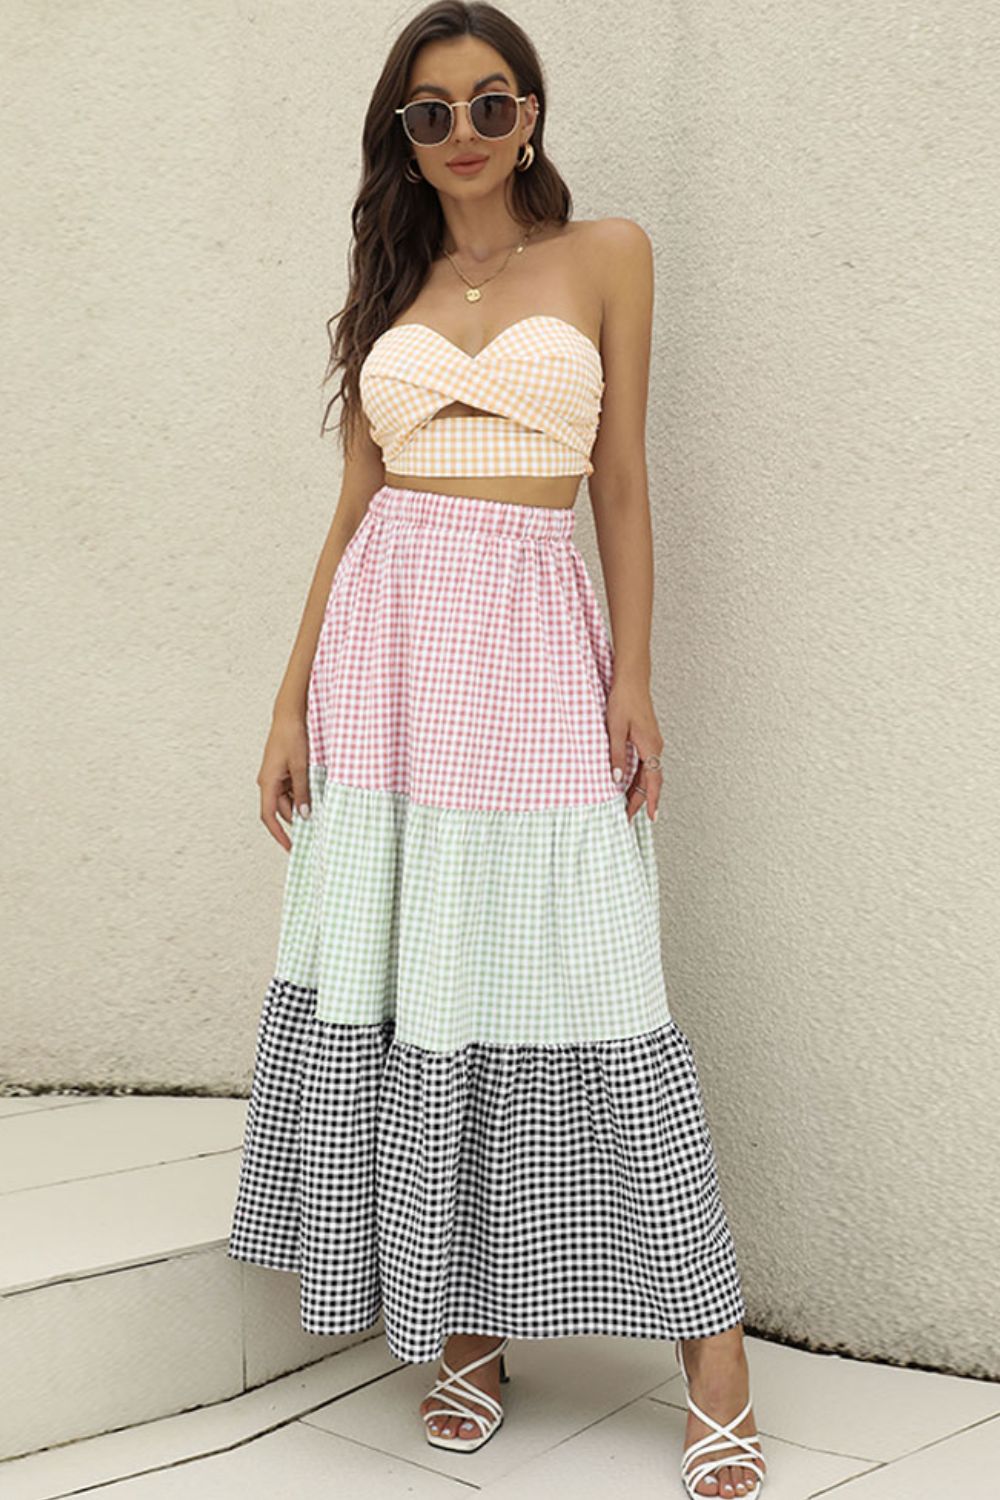 Plaid Strapless Top and Skirt Set